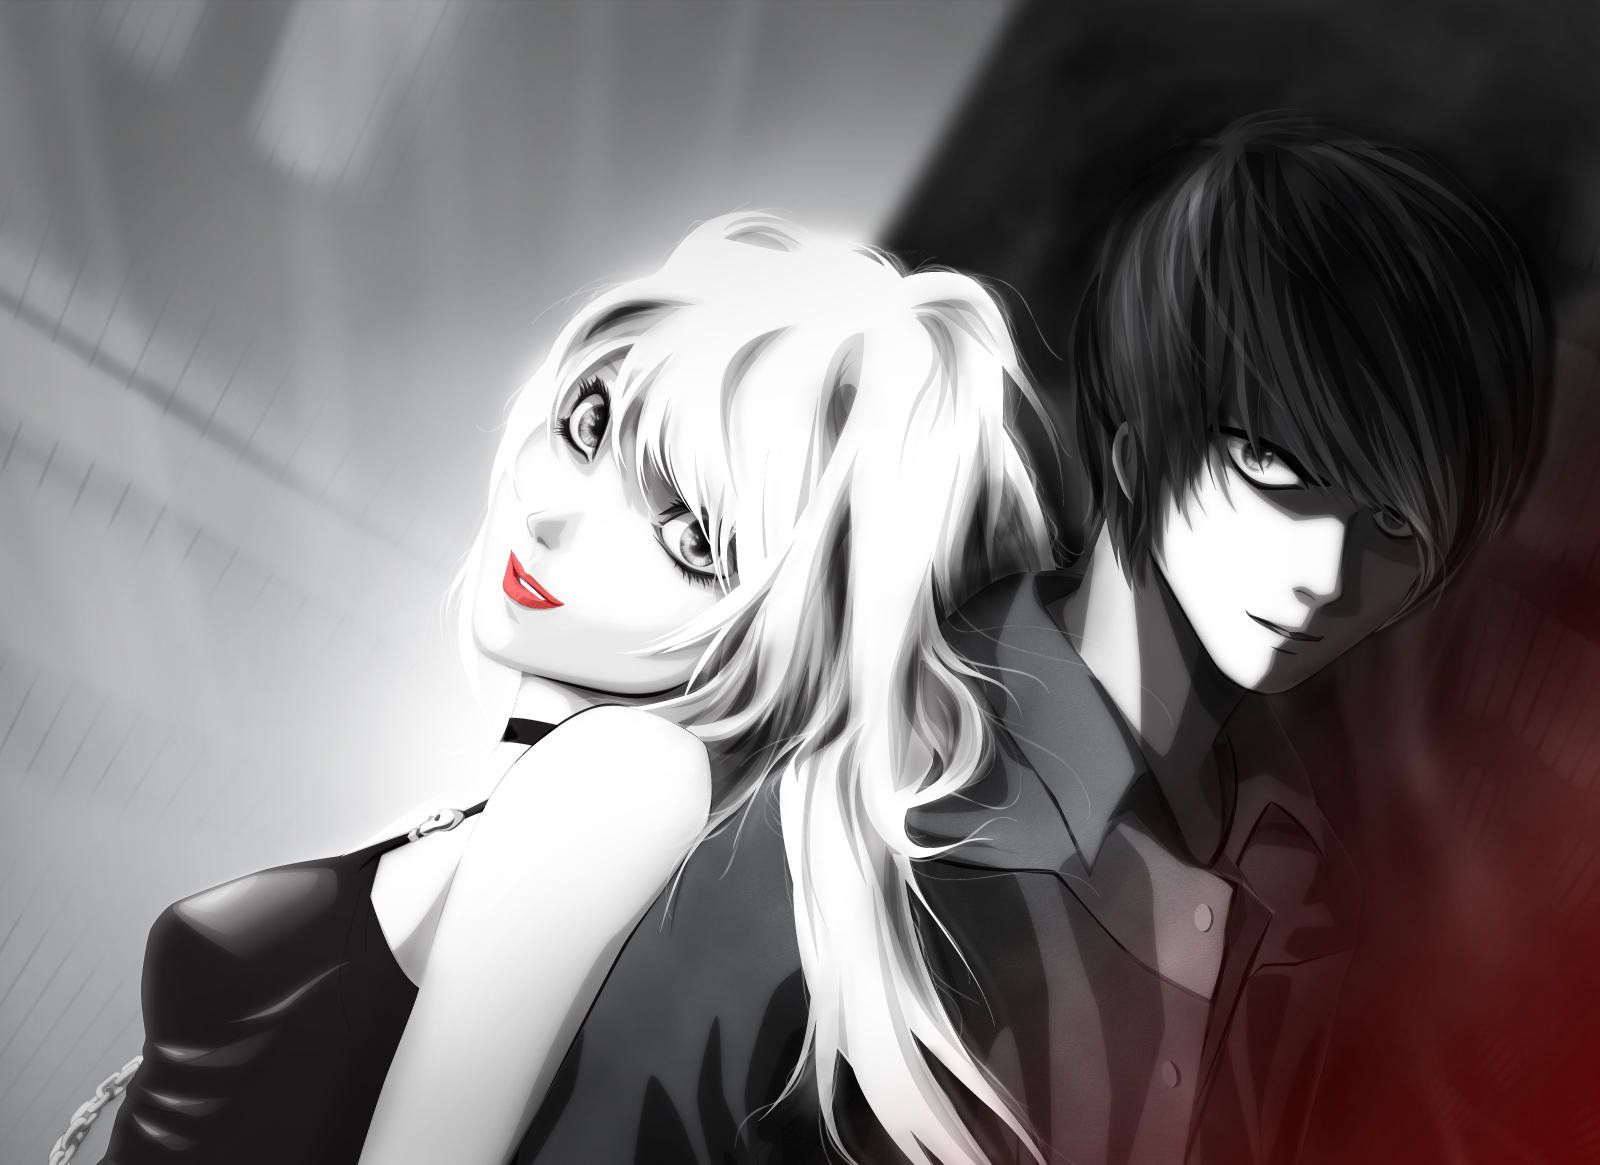 Misa and Light in Death Note